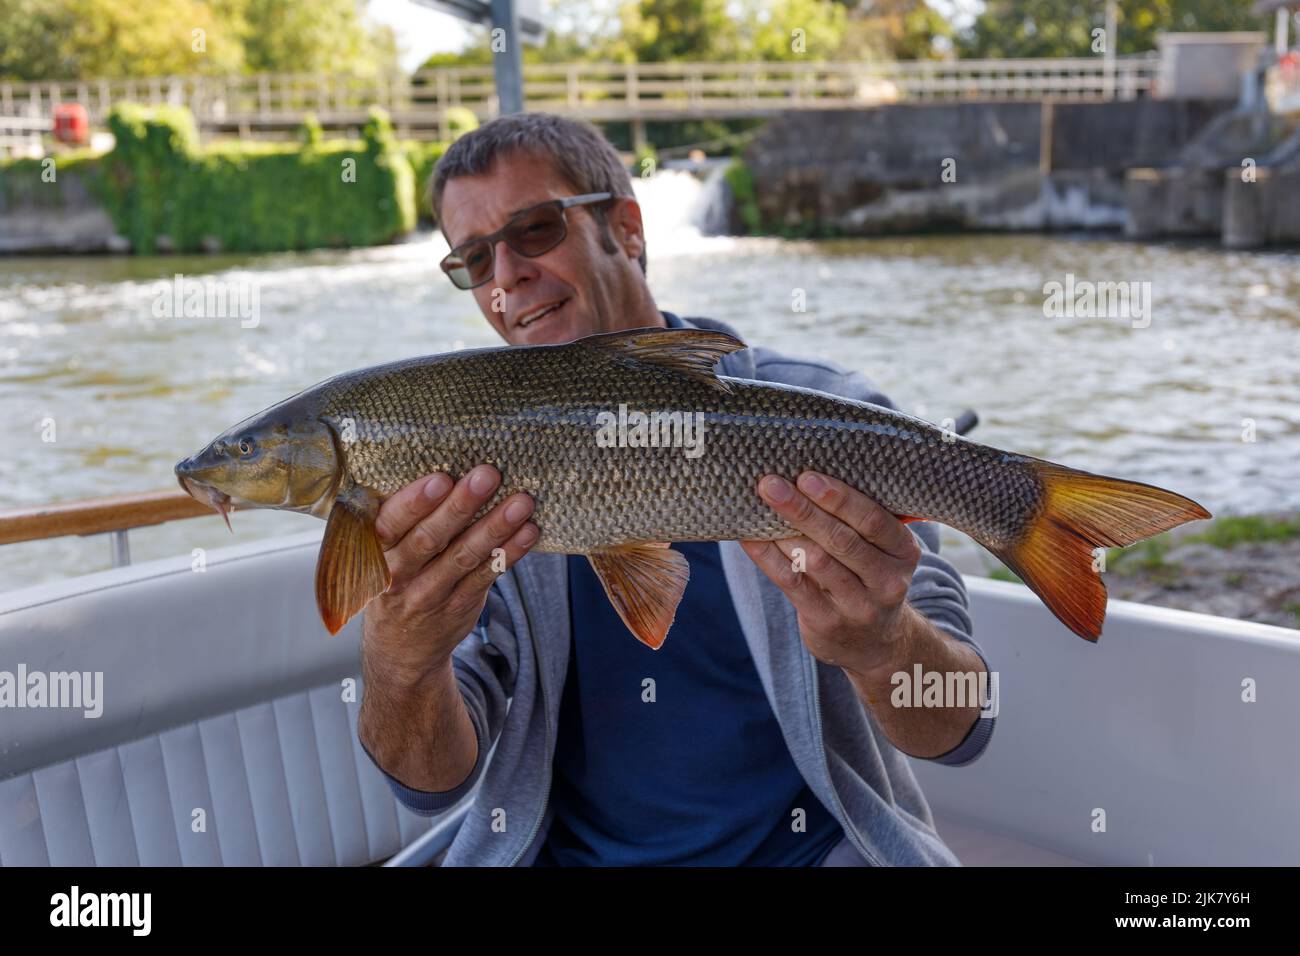 A barbel fish held by a fisherman in a boat, next to a river weir on the River Thames, U.K Stock Photo